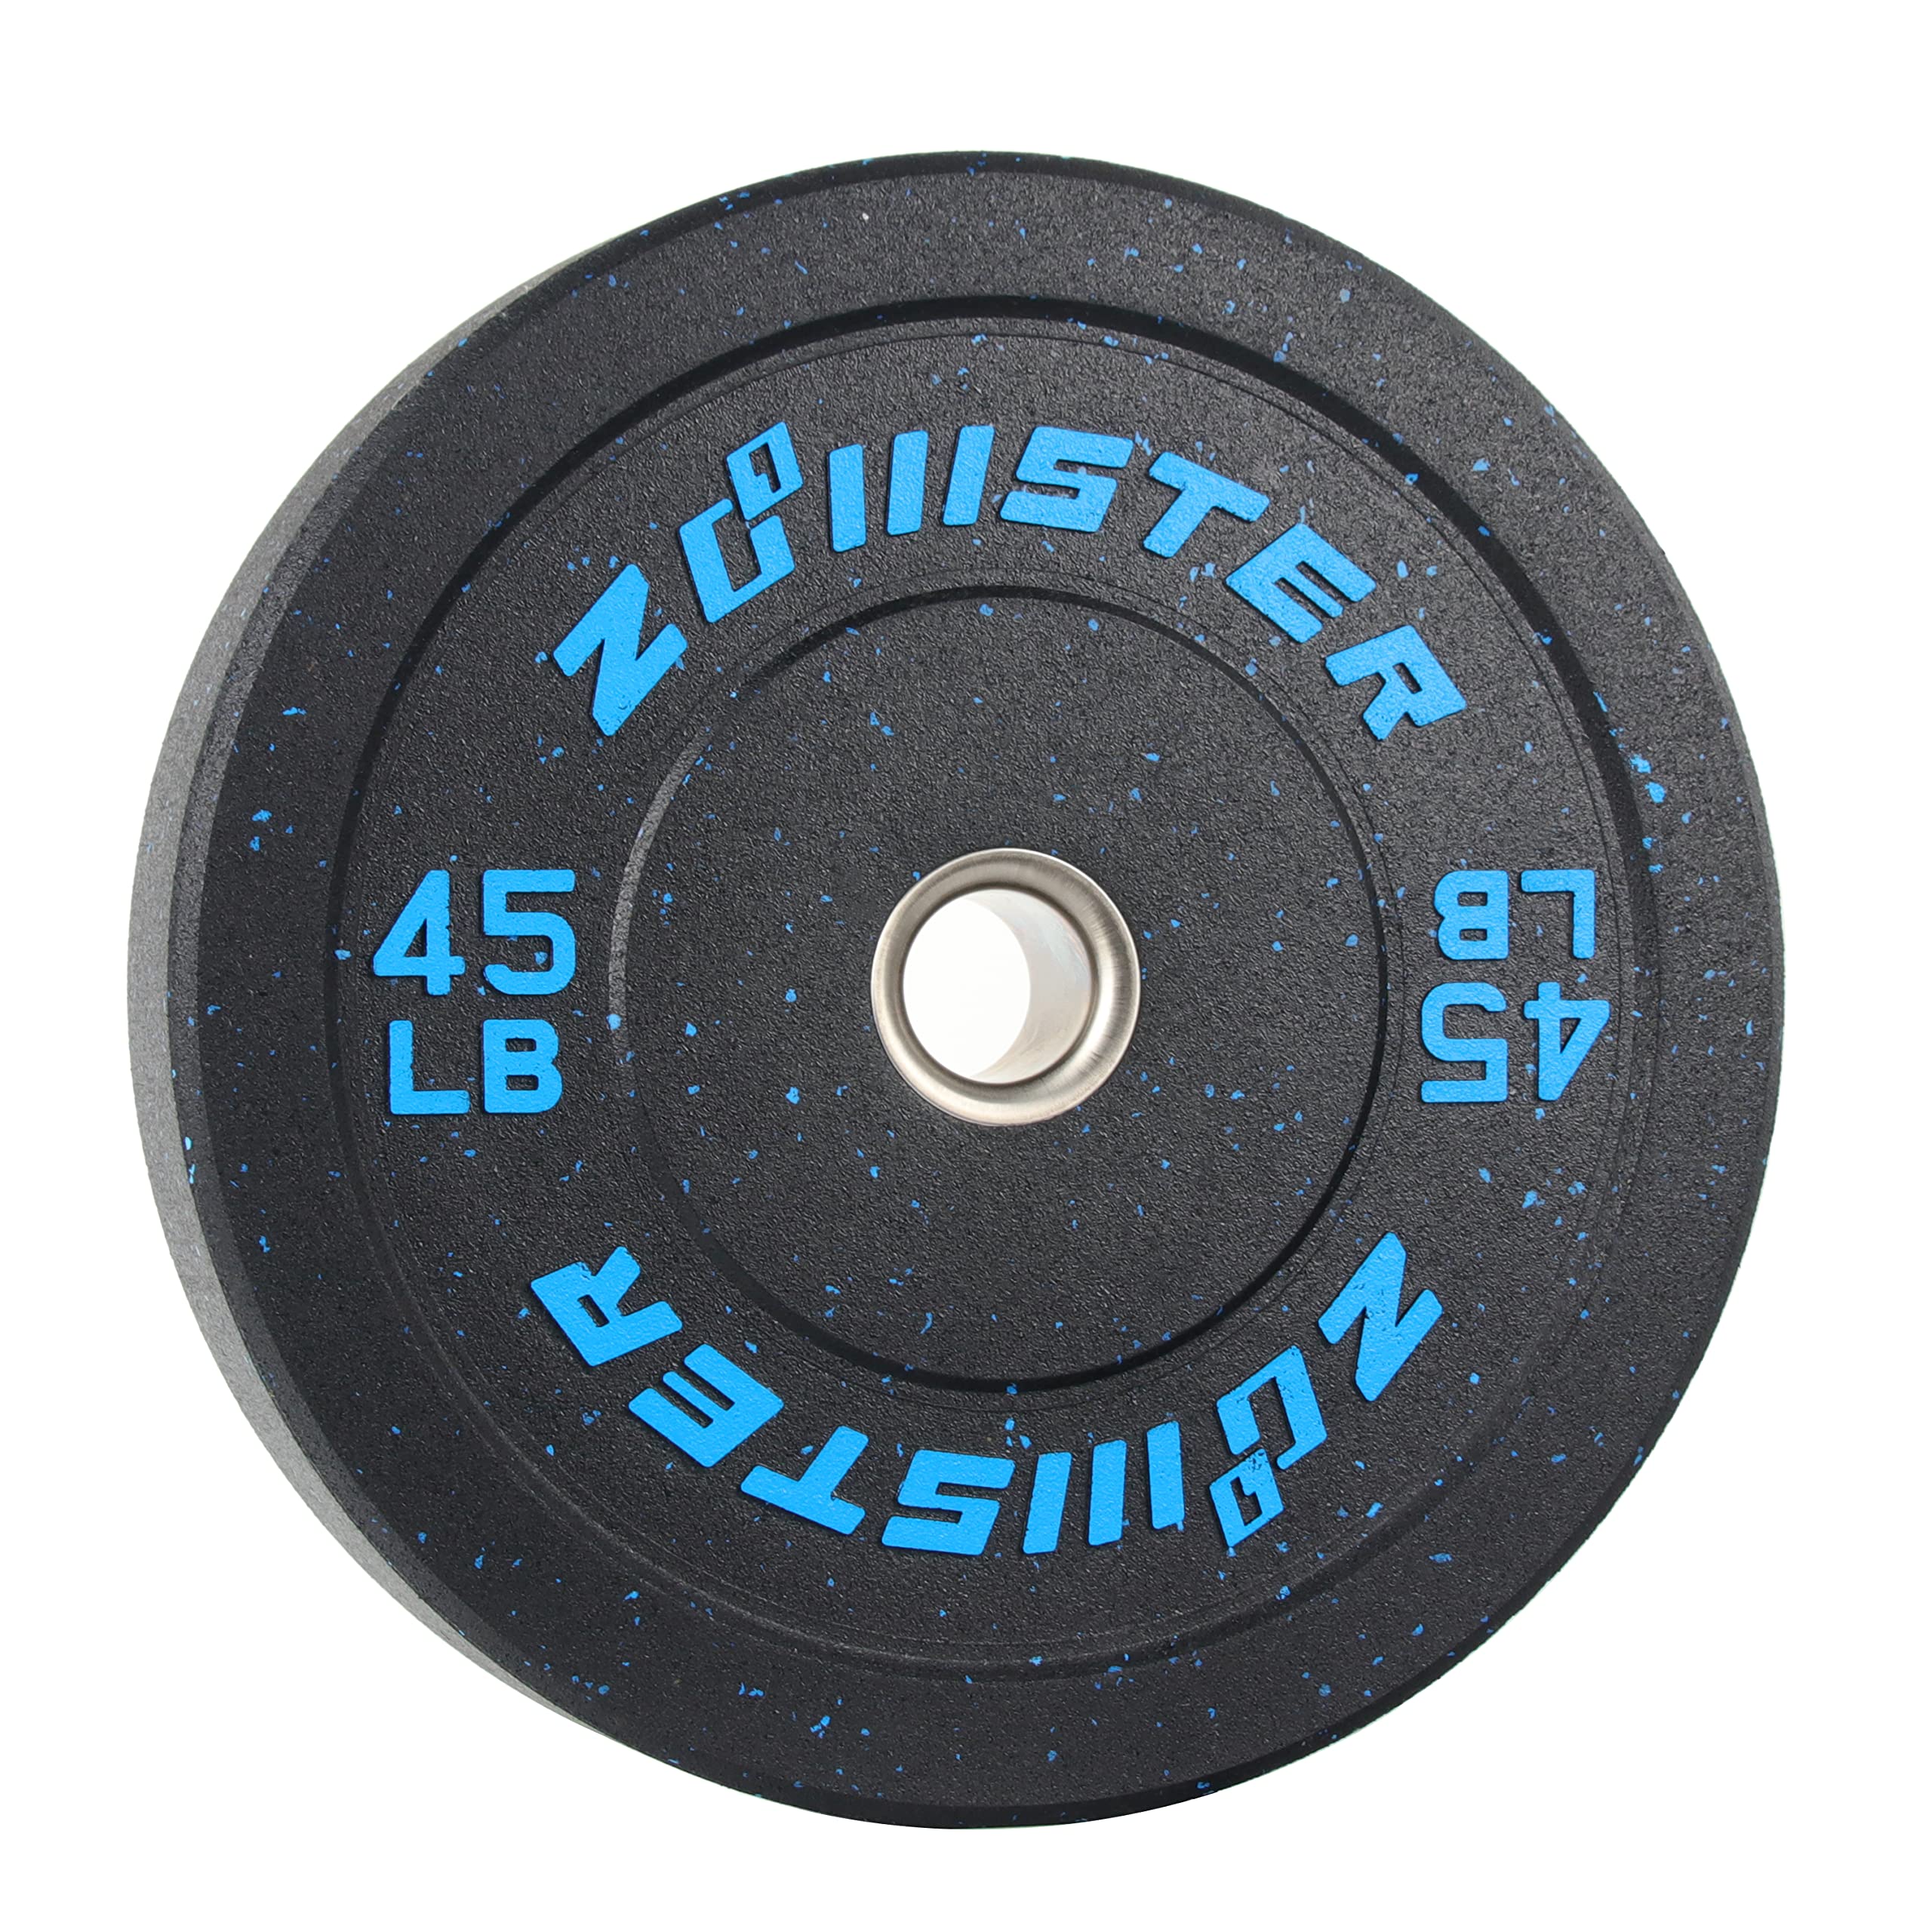 Bumper Plate Olympic Weight High Bounce with Steel Insert Strength Training Lifting (160LB Set)